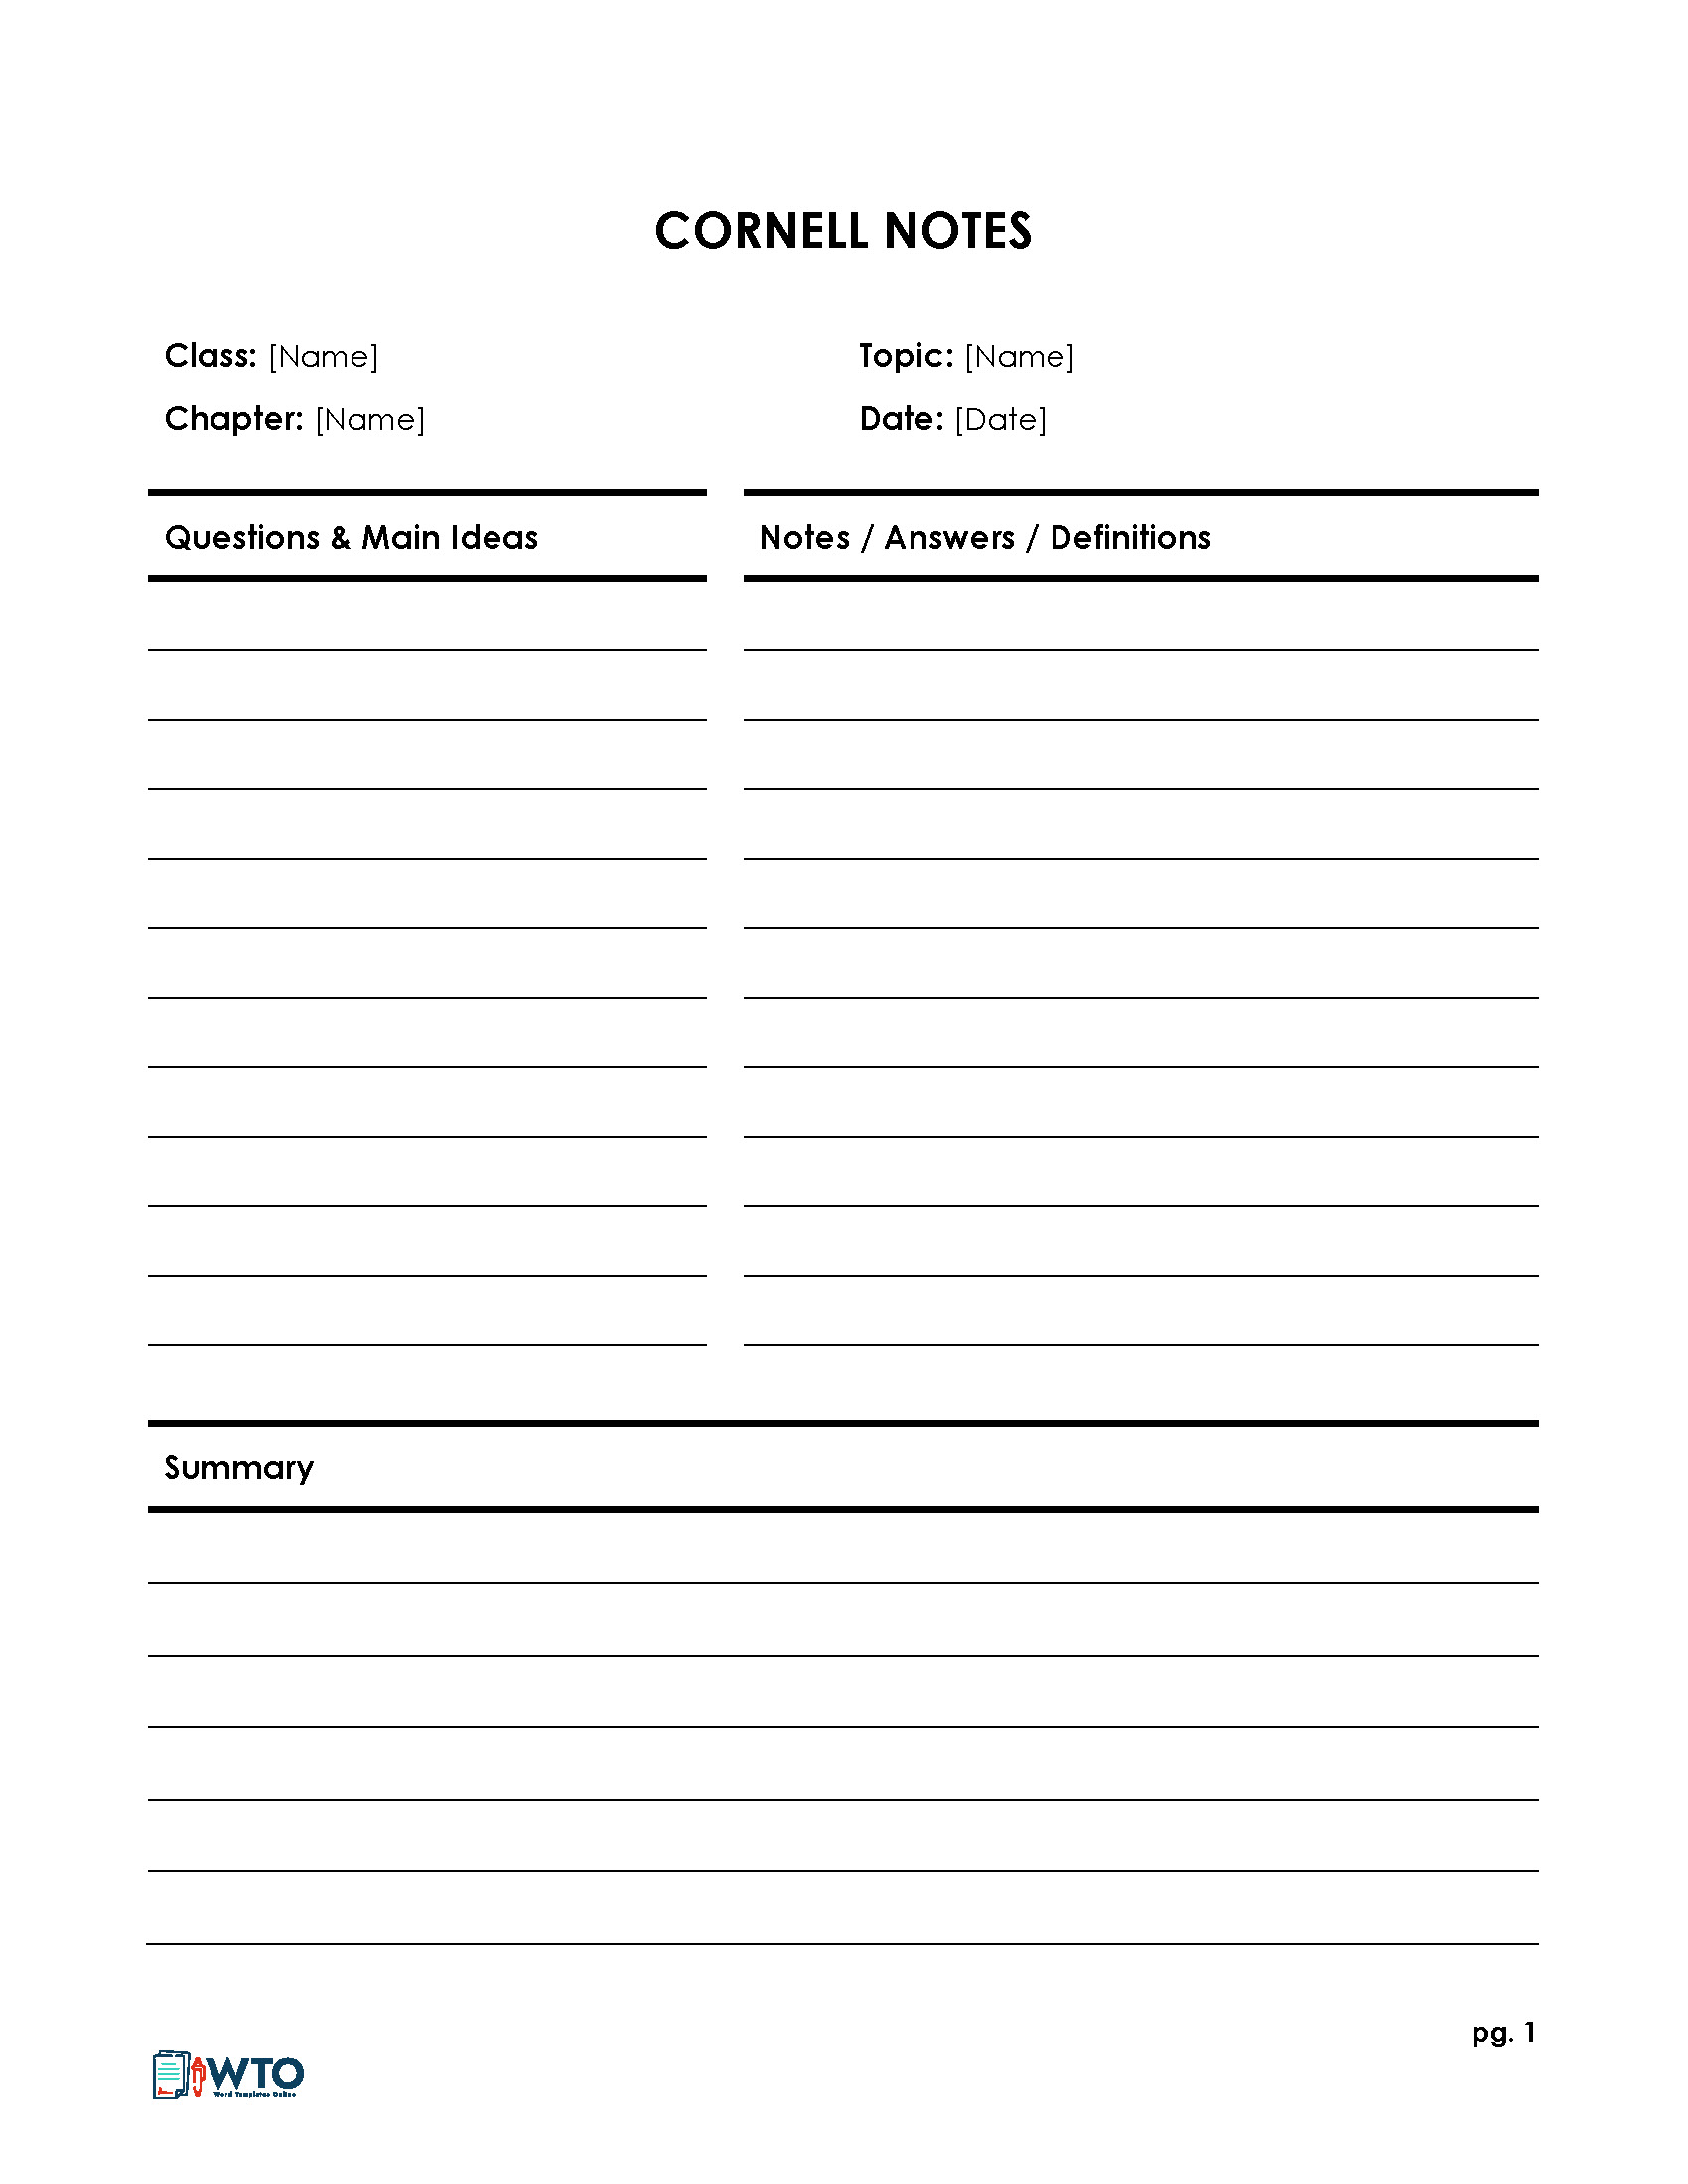 Sample Cornell Note Format Word Download